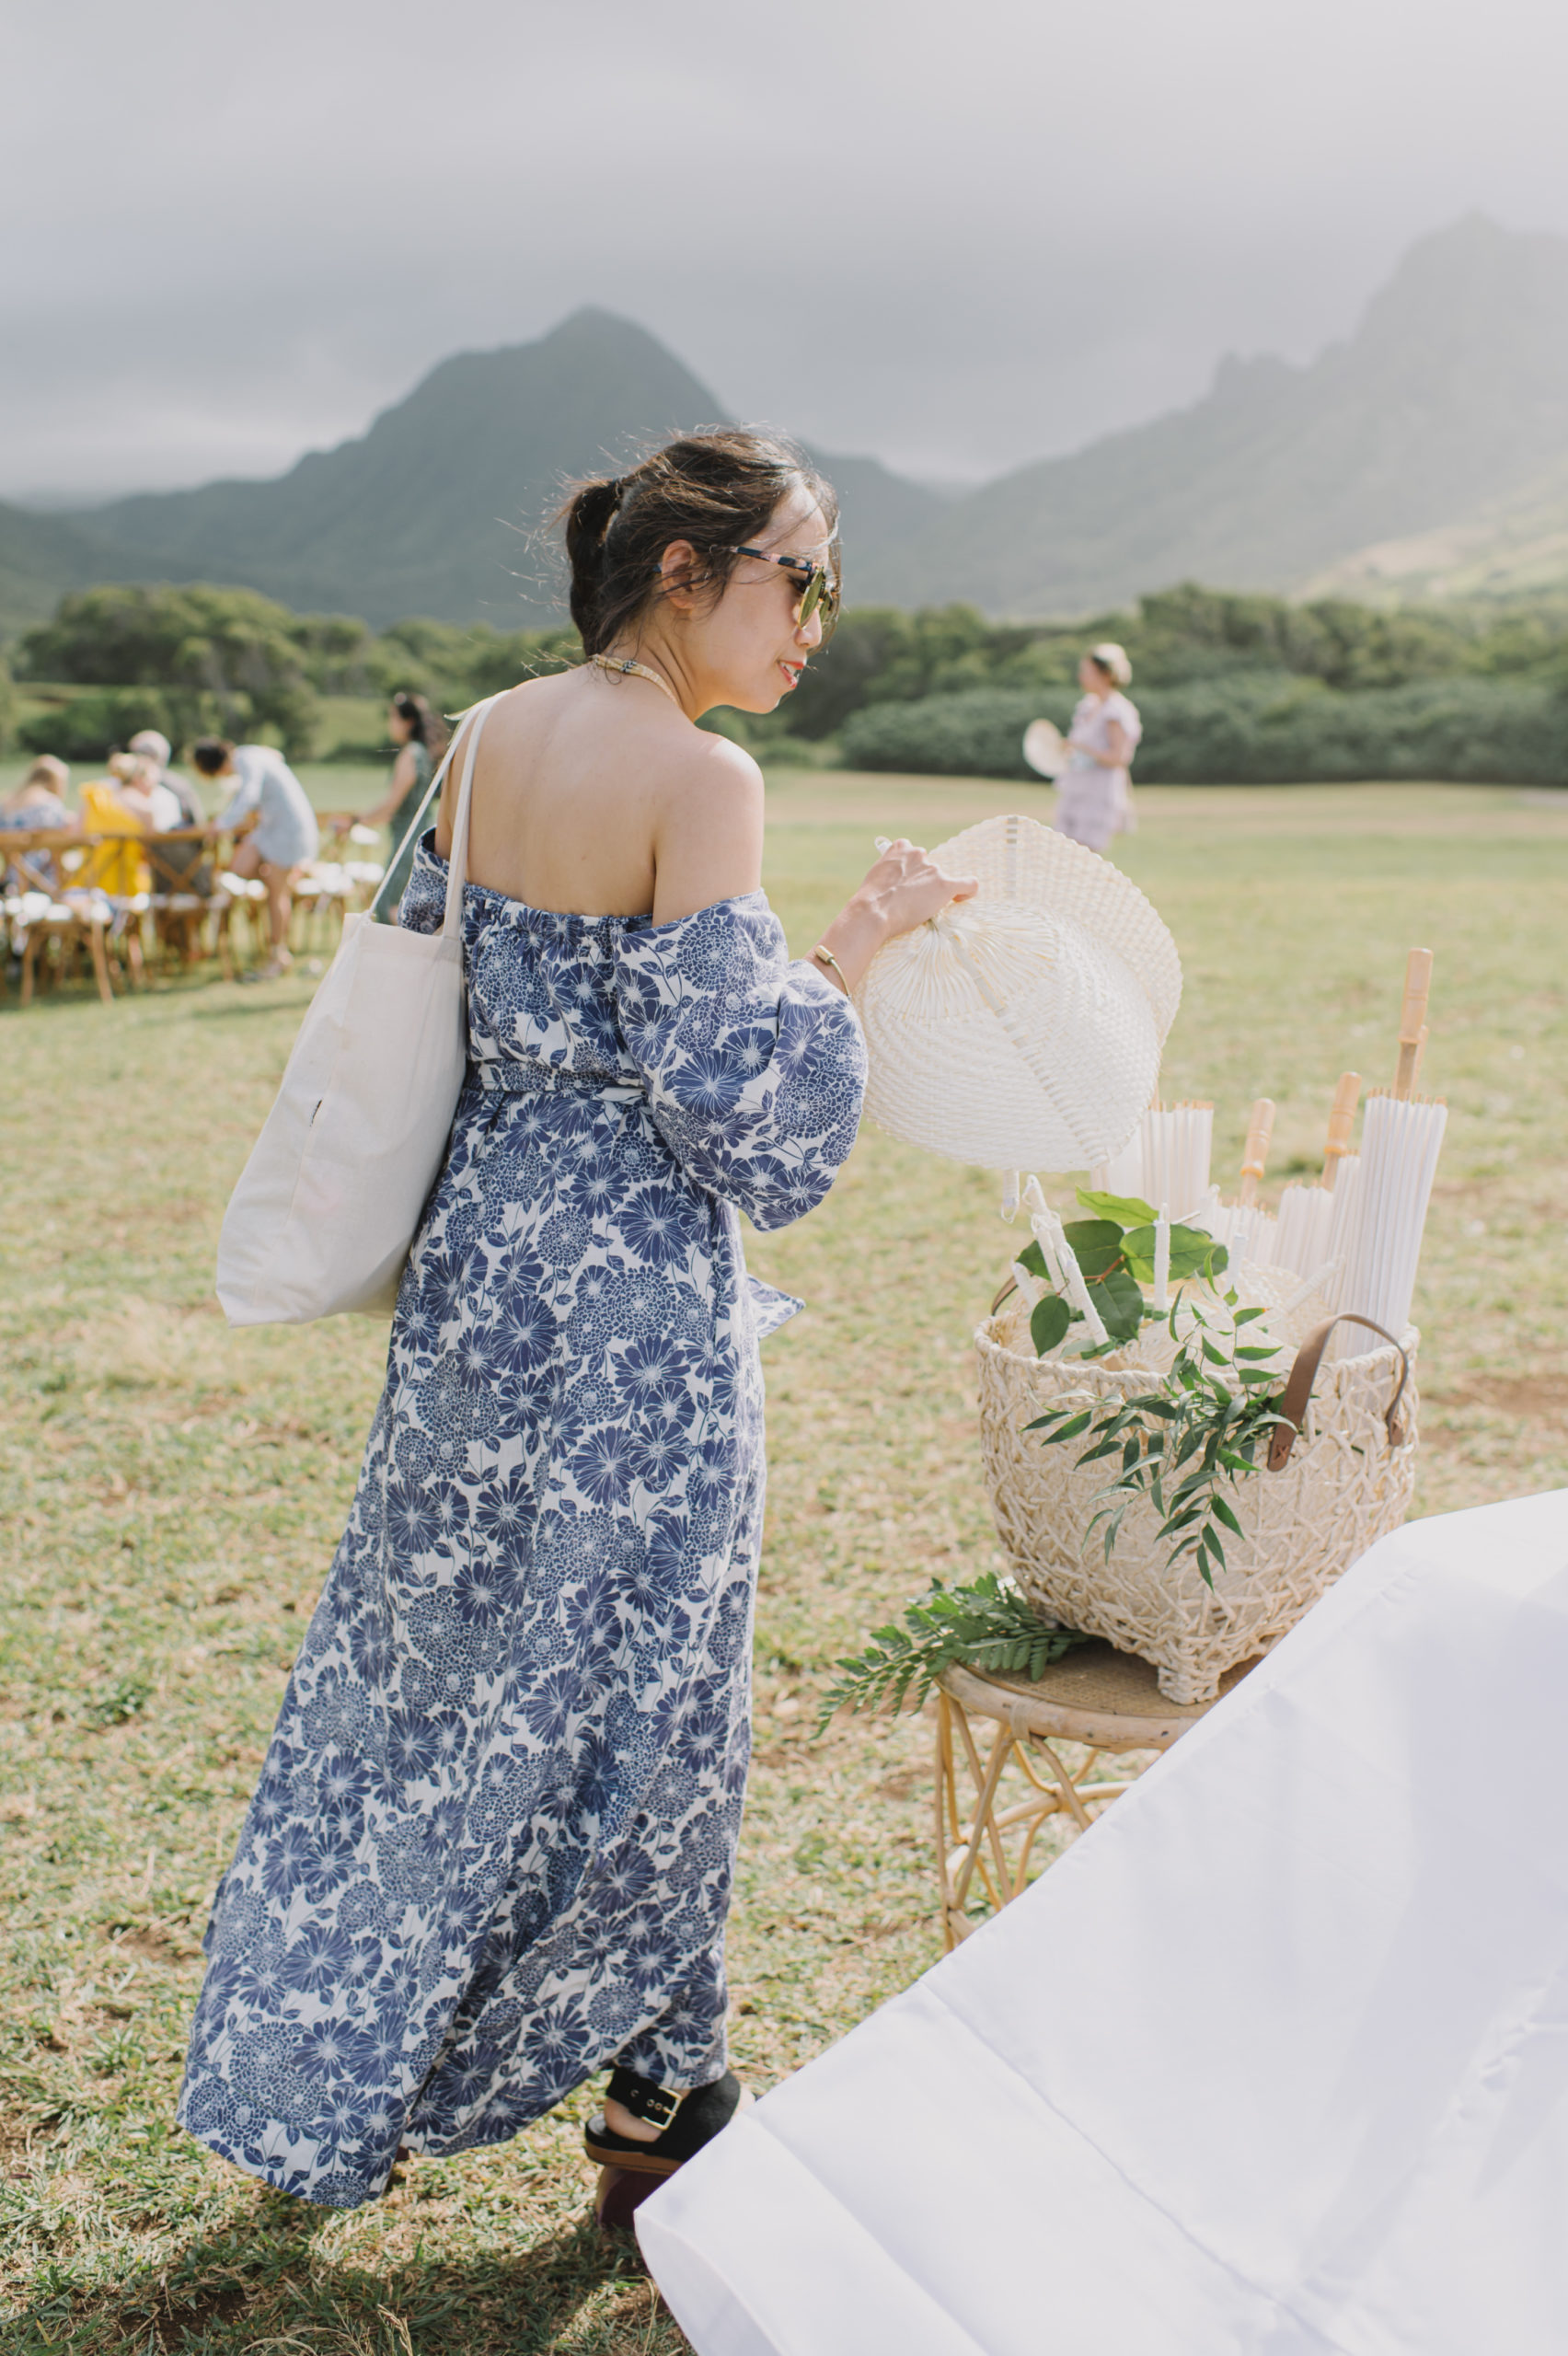 Candid shot of guests preparing for the ceremony at Kualoa Ranch L Hewitt Photography